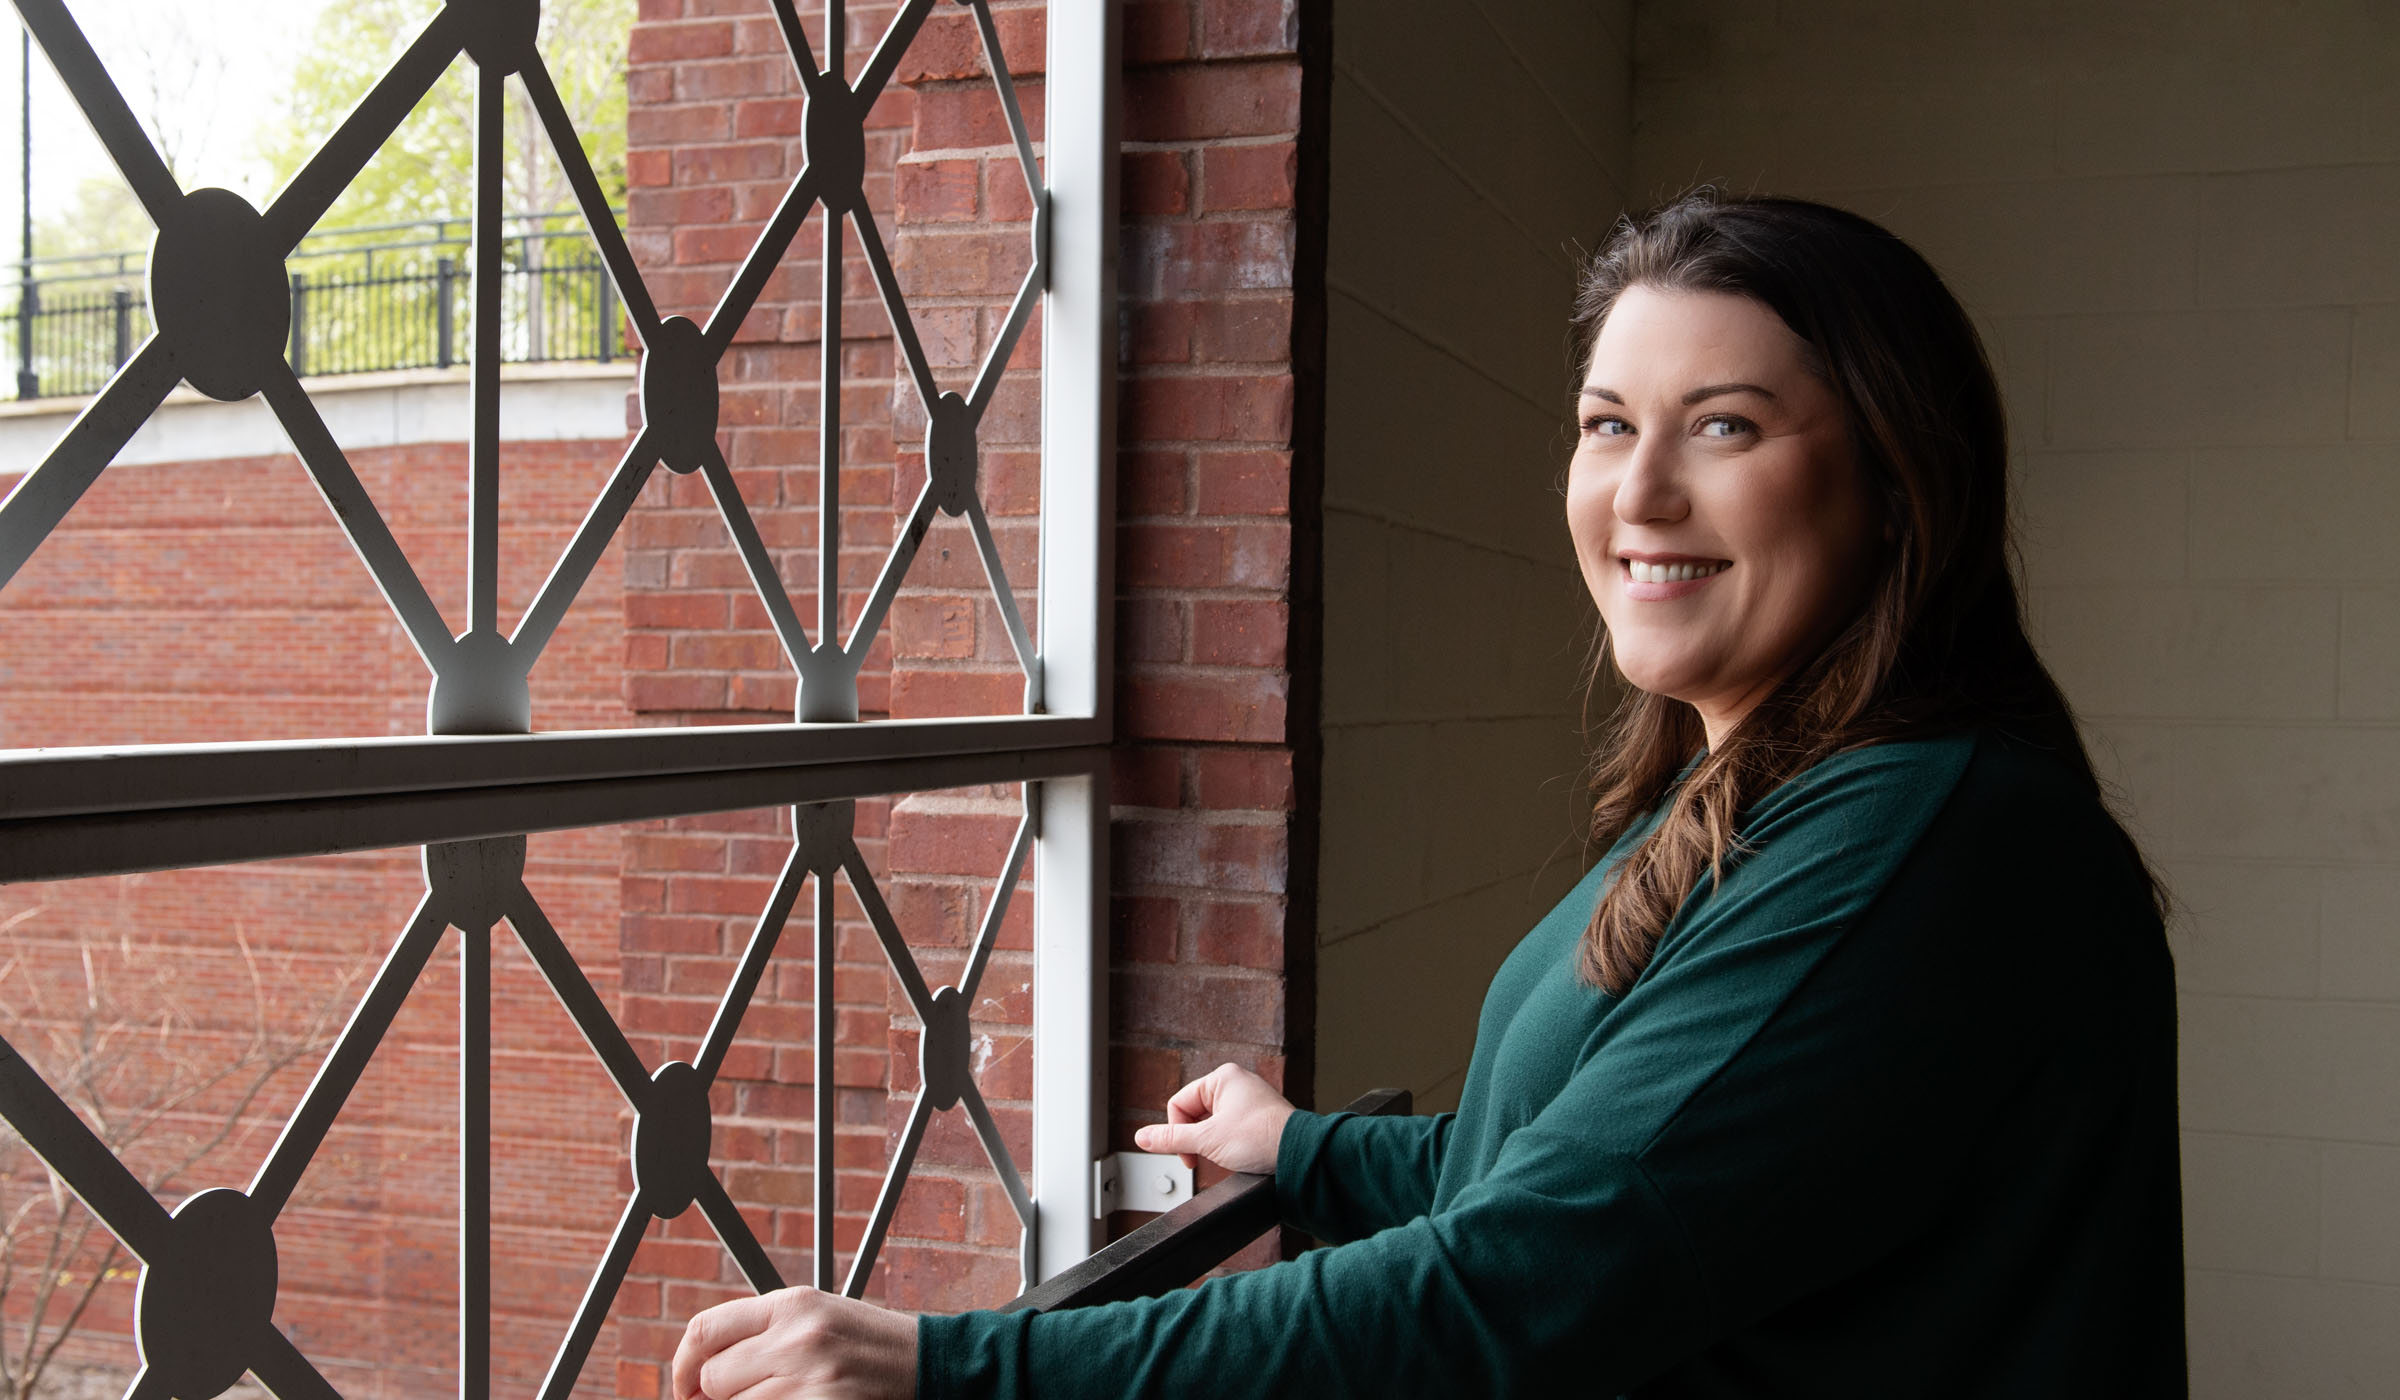 Emily Cain, pictured in front of a window on the MSU campus